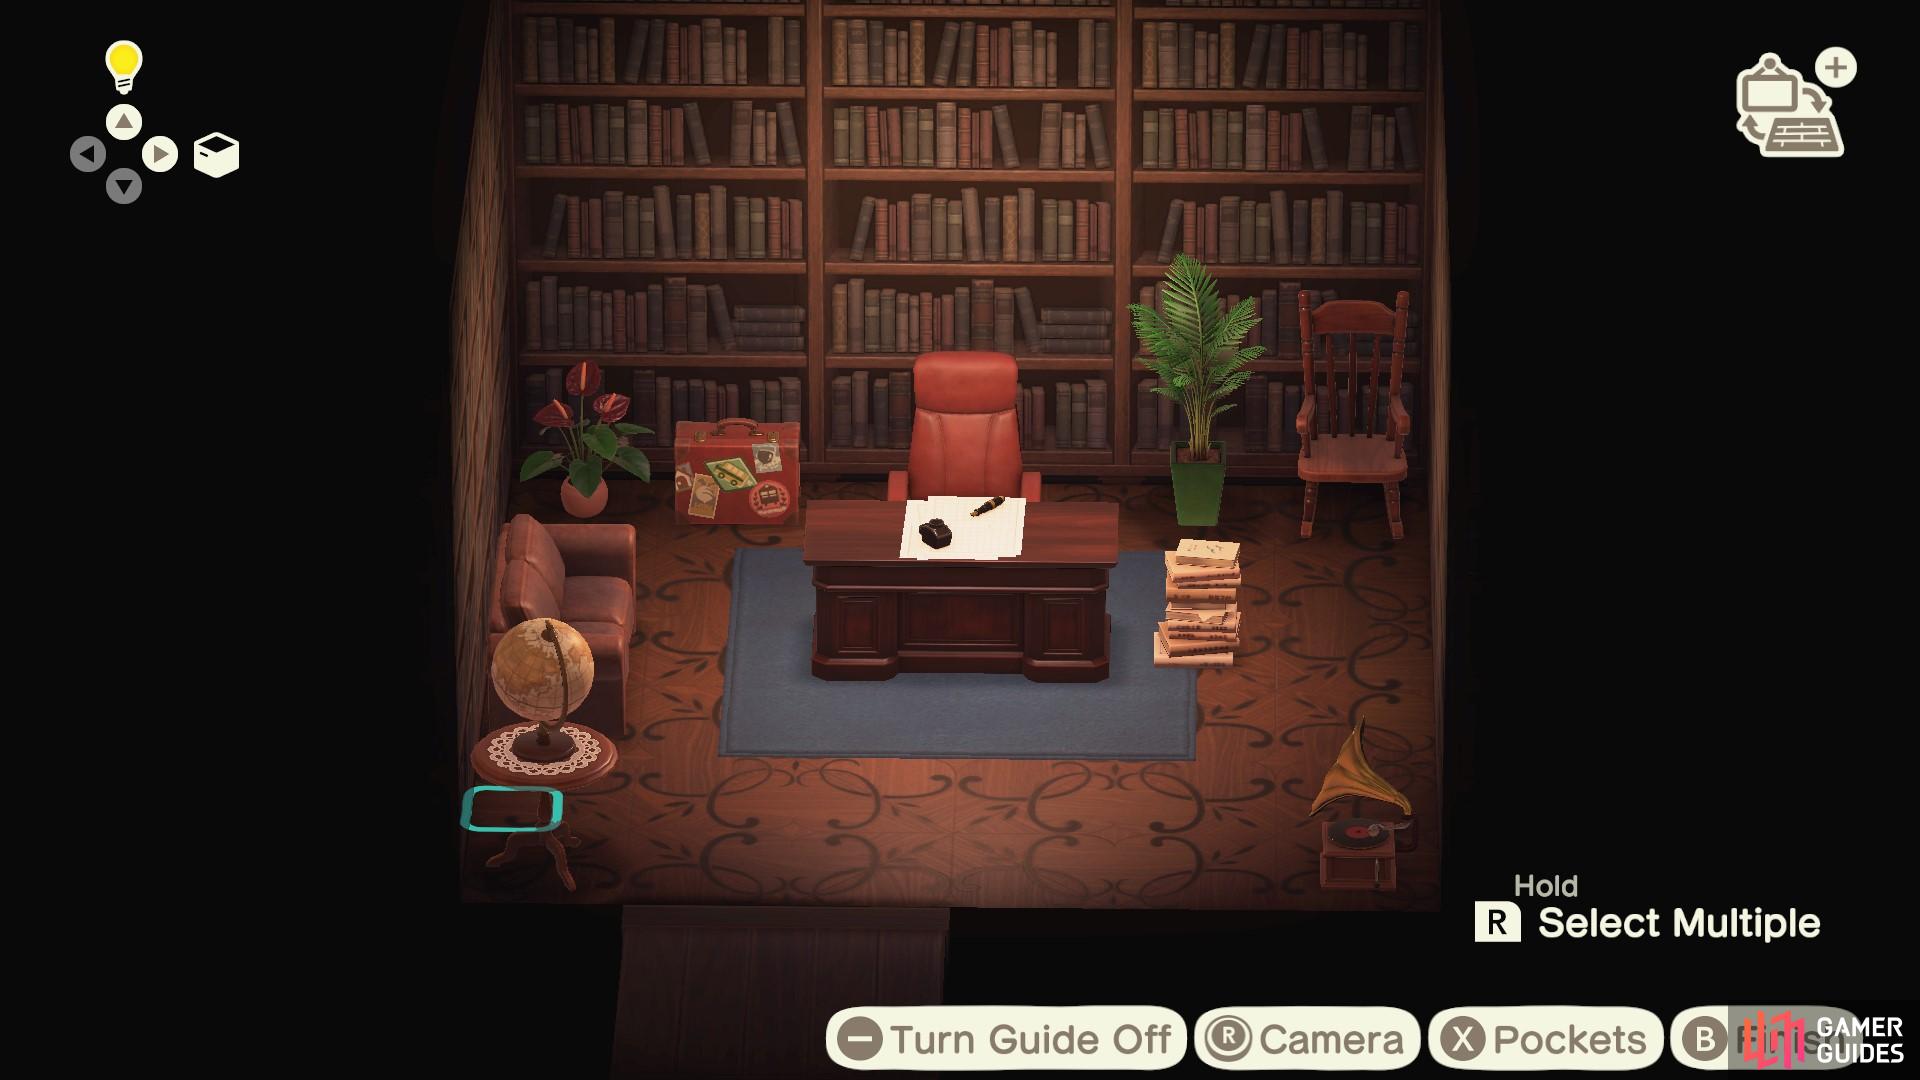 If you collect enough fancy things, you can turn your new room into a posh study.